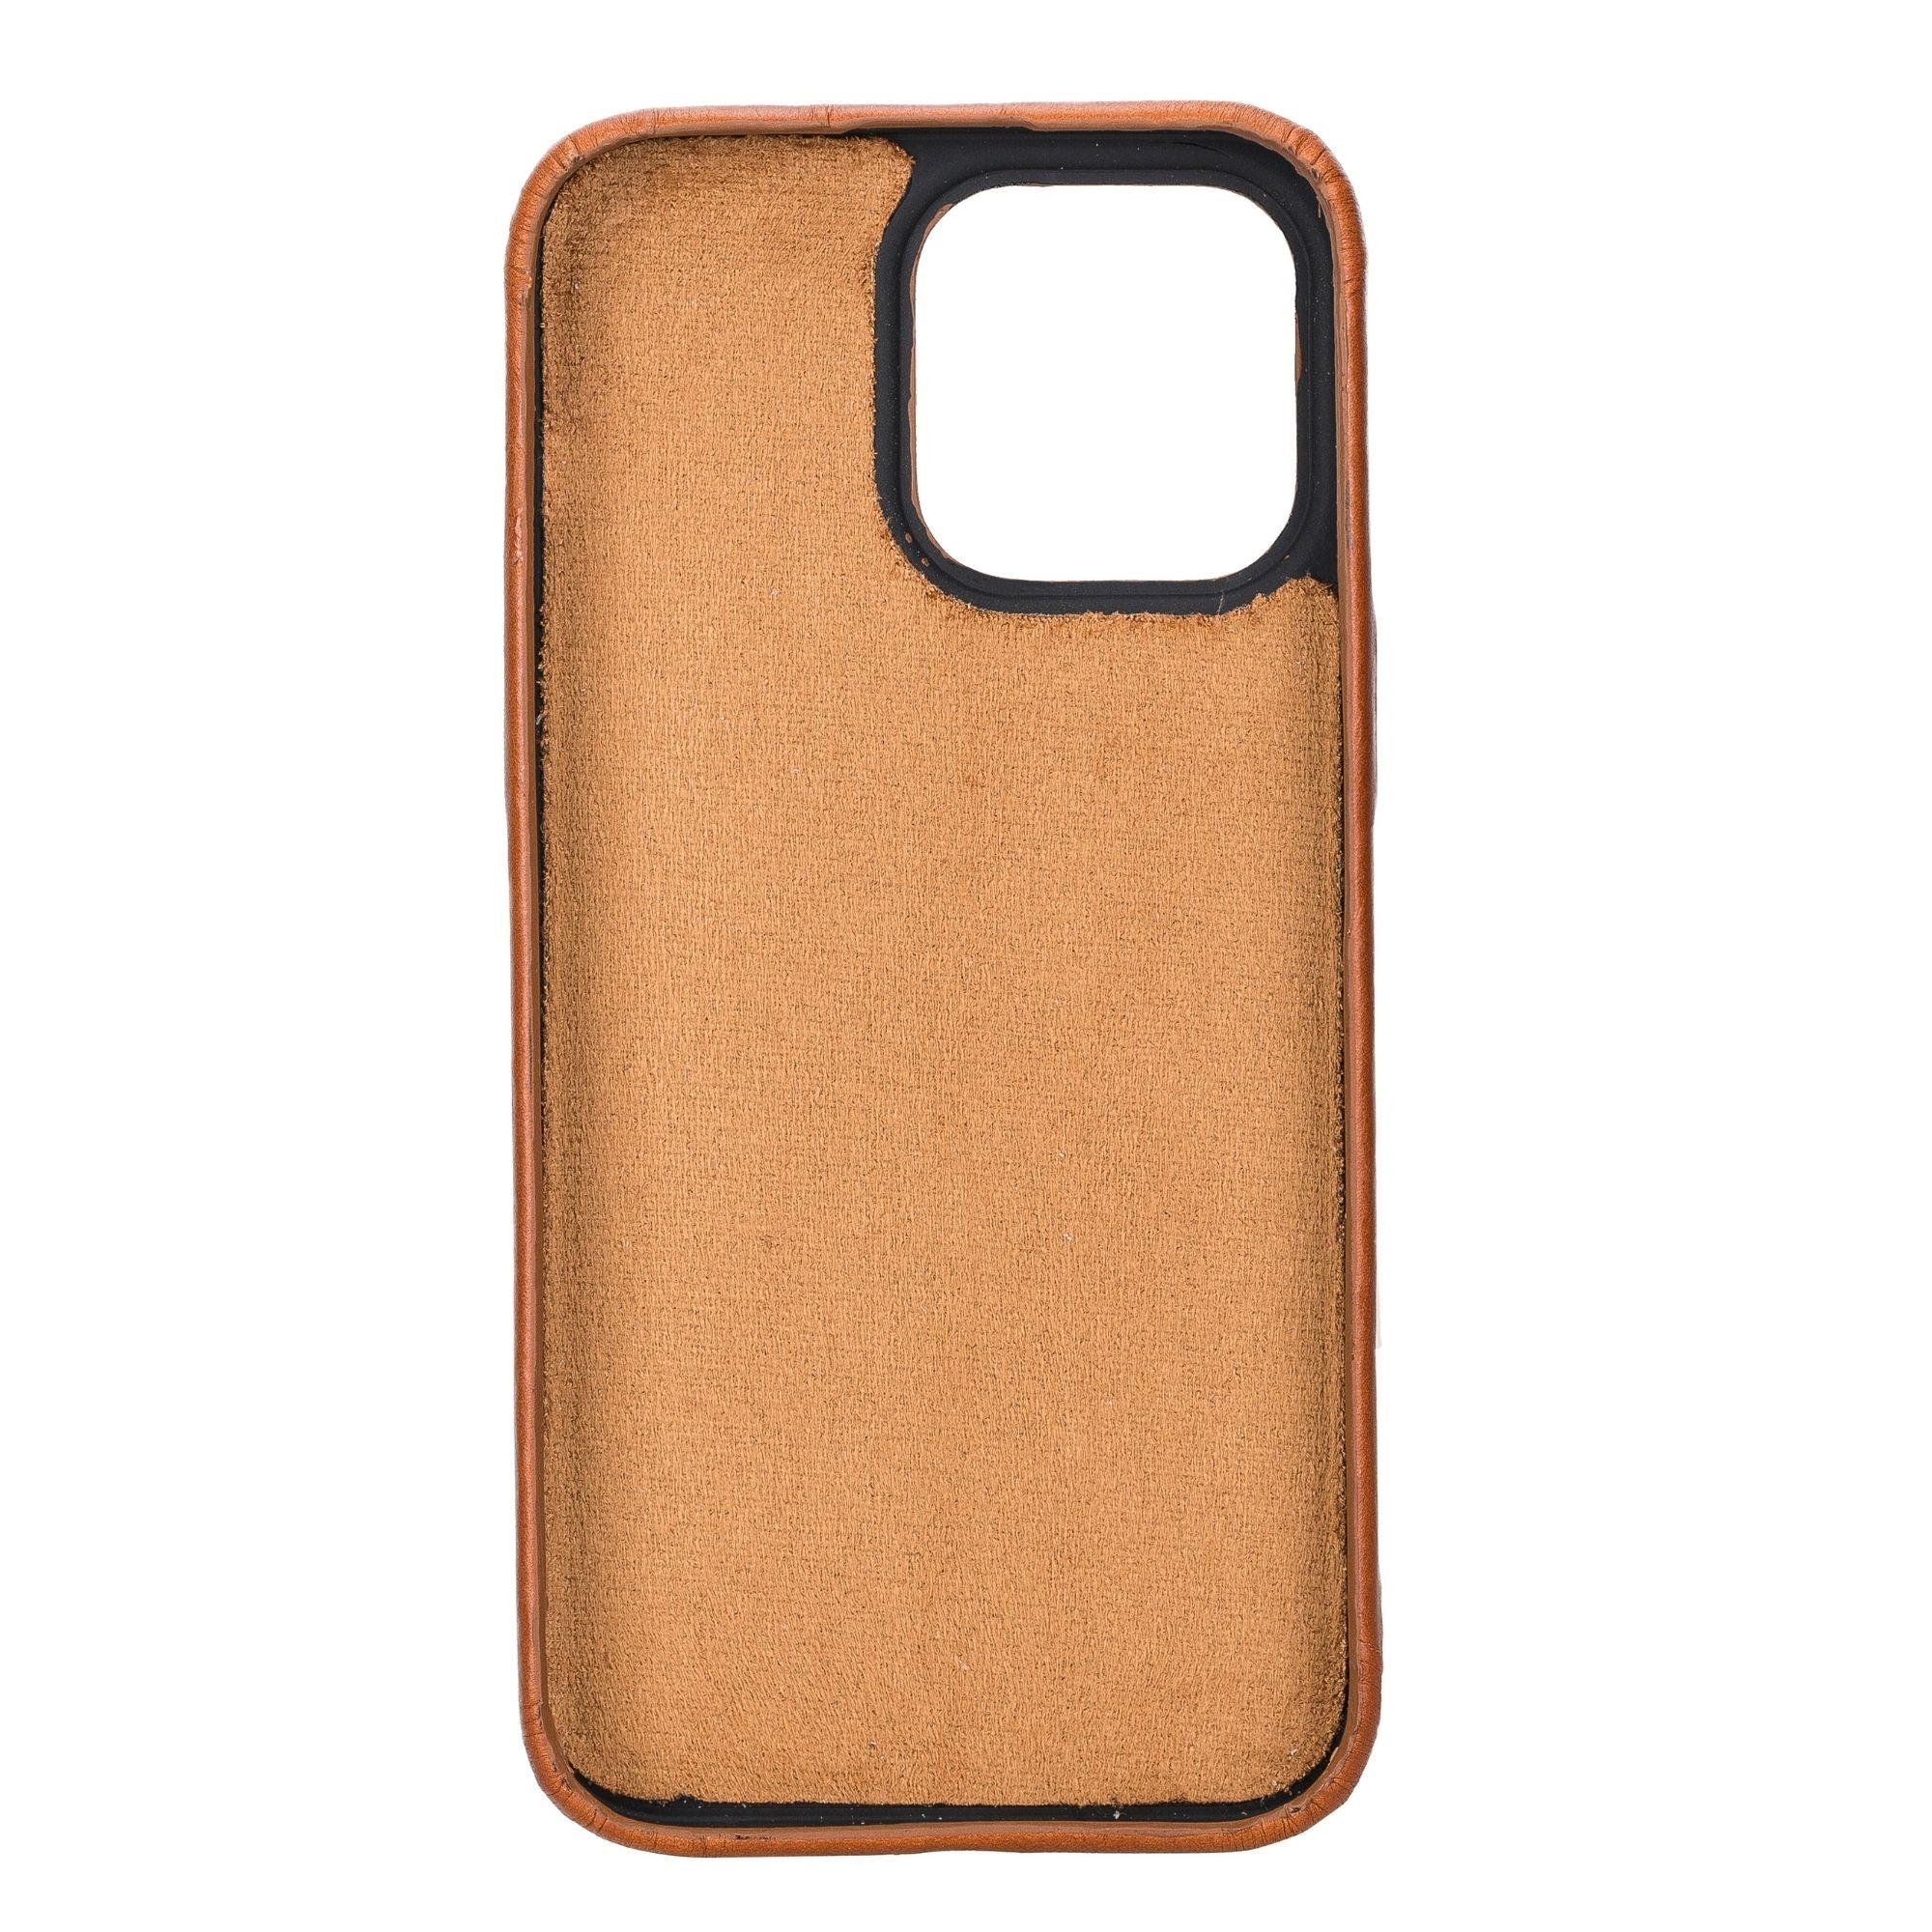 Pinedale Leather Snap-on Case for iPhone 13 Series - iPhone 13 Pro Max - Tan - TORONATA